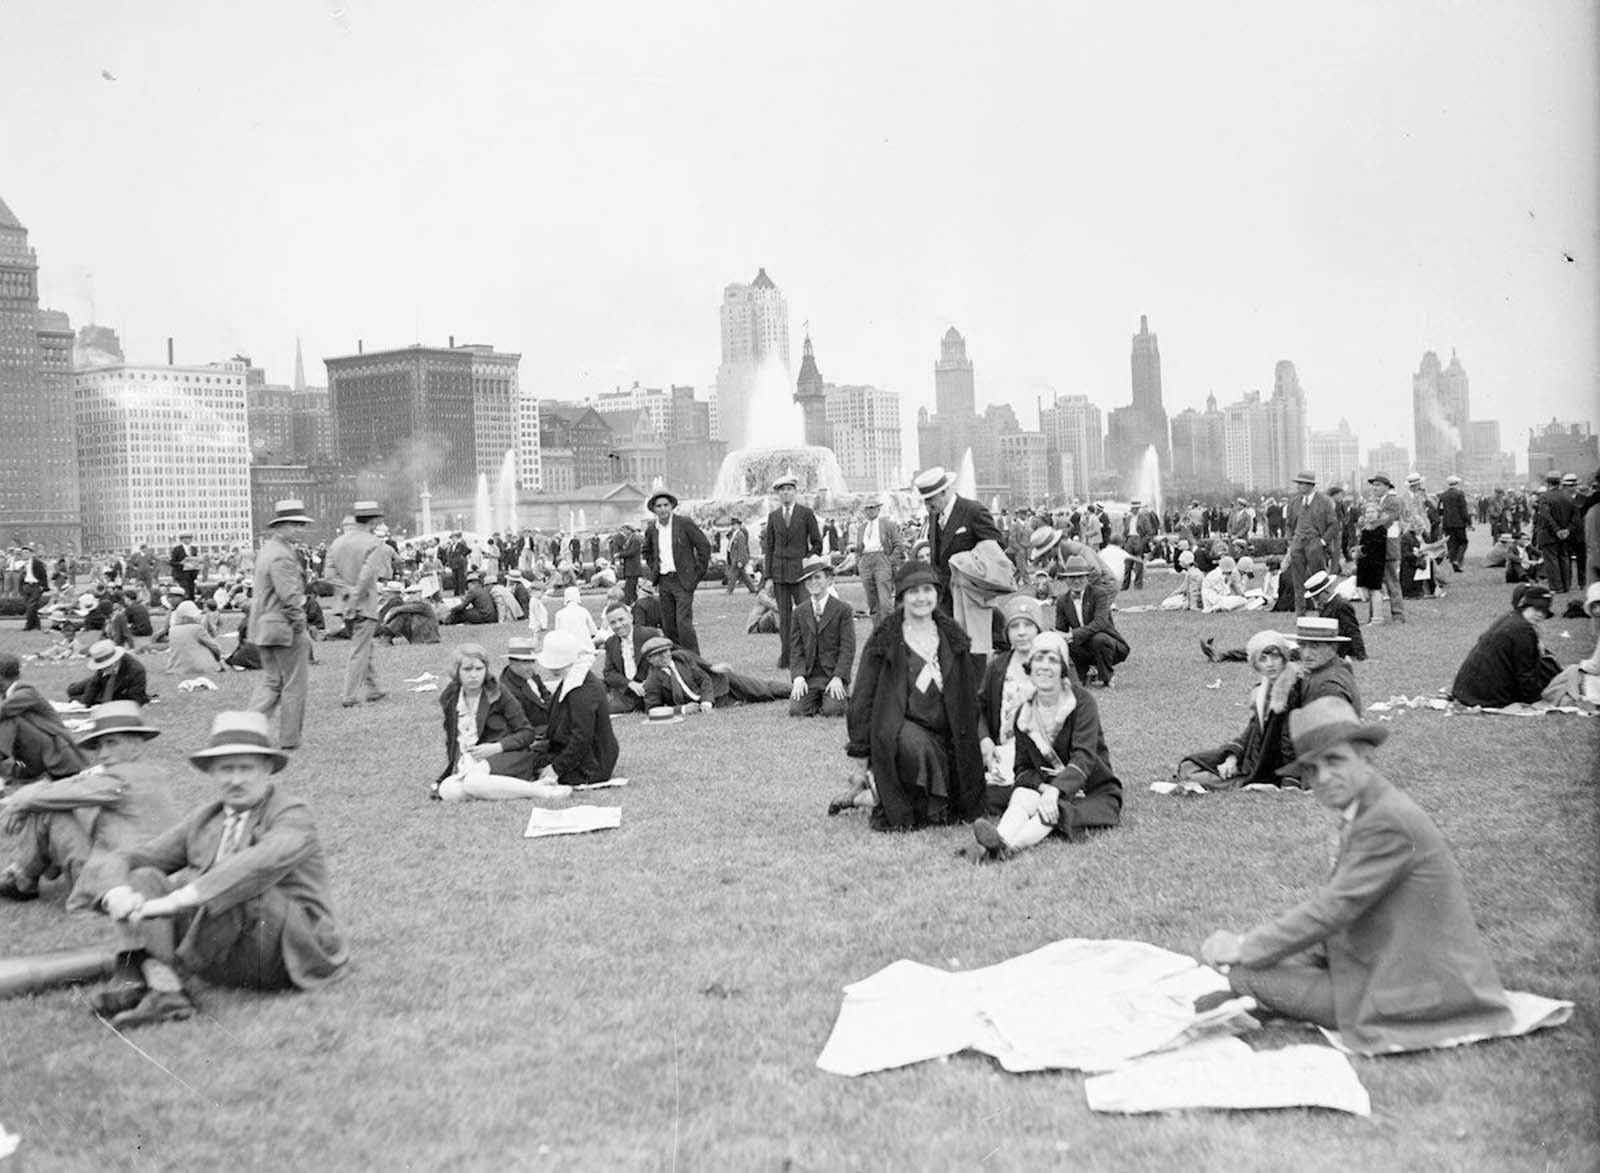 Crowds sitting and standing on a lawn in Chicago’s Grant Park.